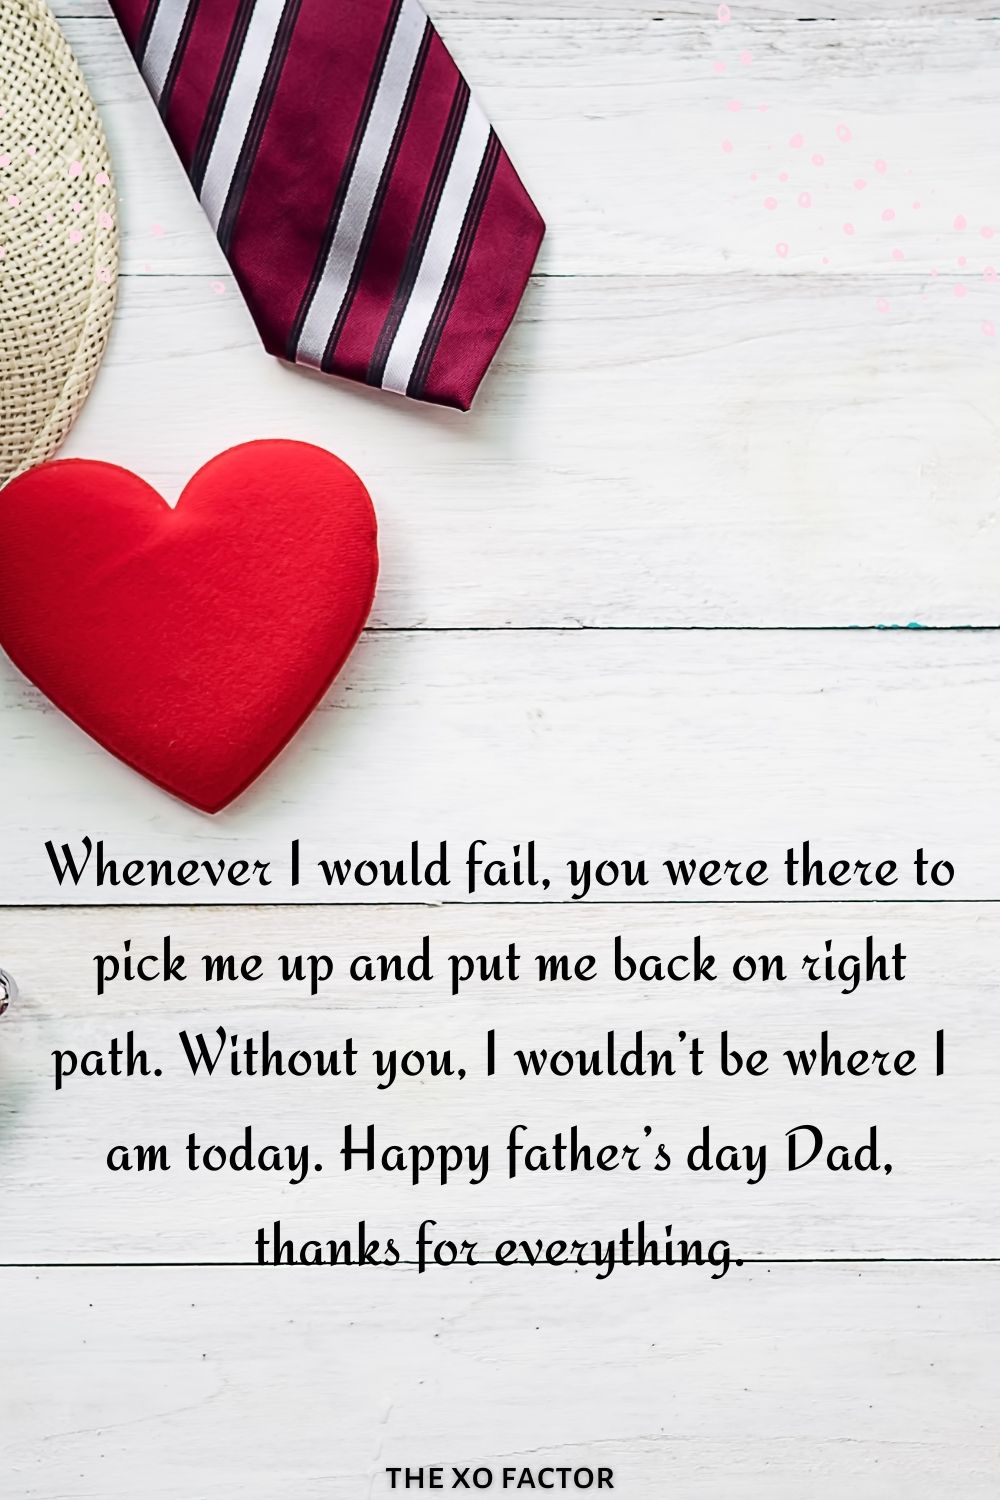 Whenever I would fail, you were there to pick me up and put me back on right path. Without you, I wouldn’t be where I am today. Happy father’s day Dad, father's day wishesthanks for everything.